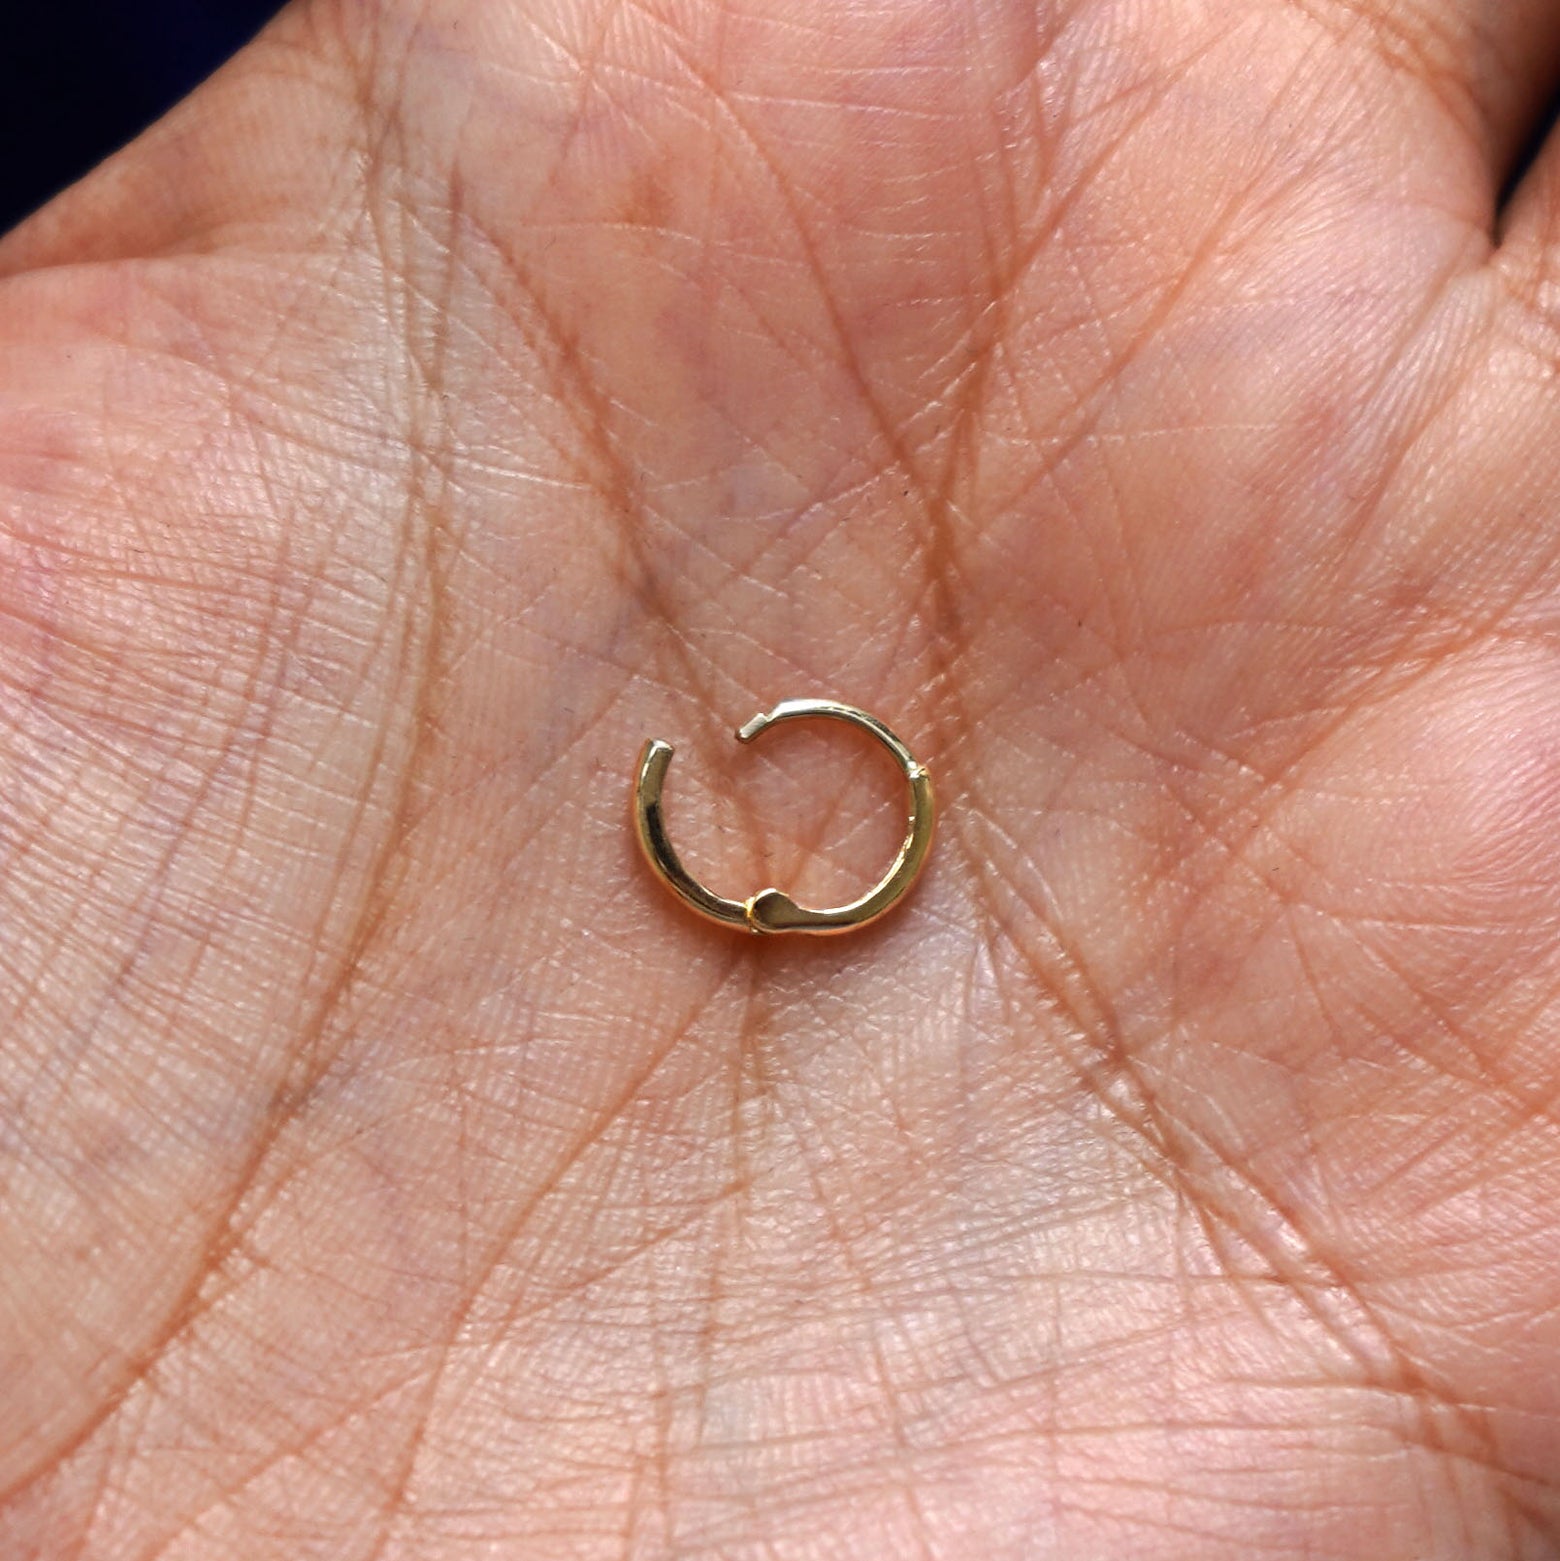 A solid 14k yellow gold Small Curvy Huggie Hoop Earring open in a model's palm to show the hinge